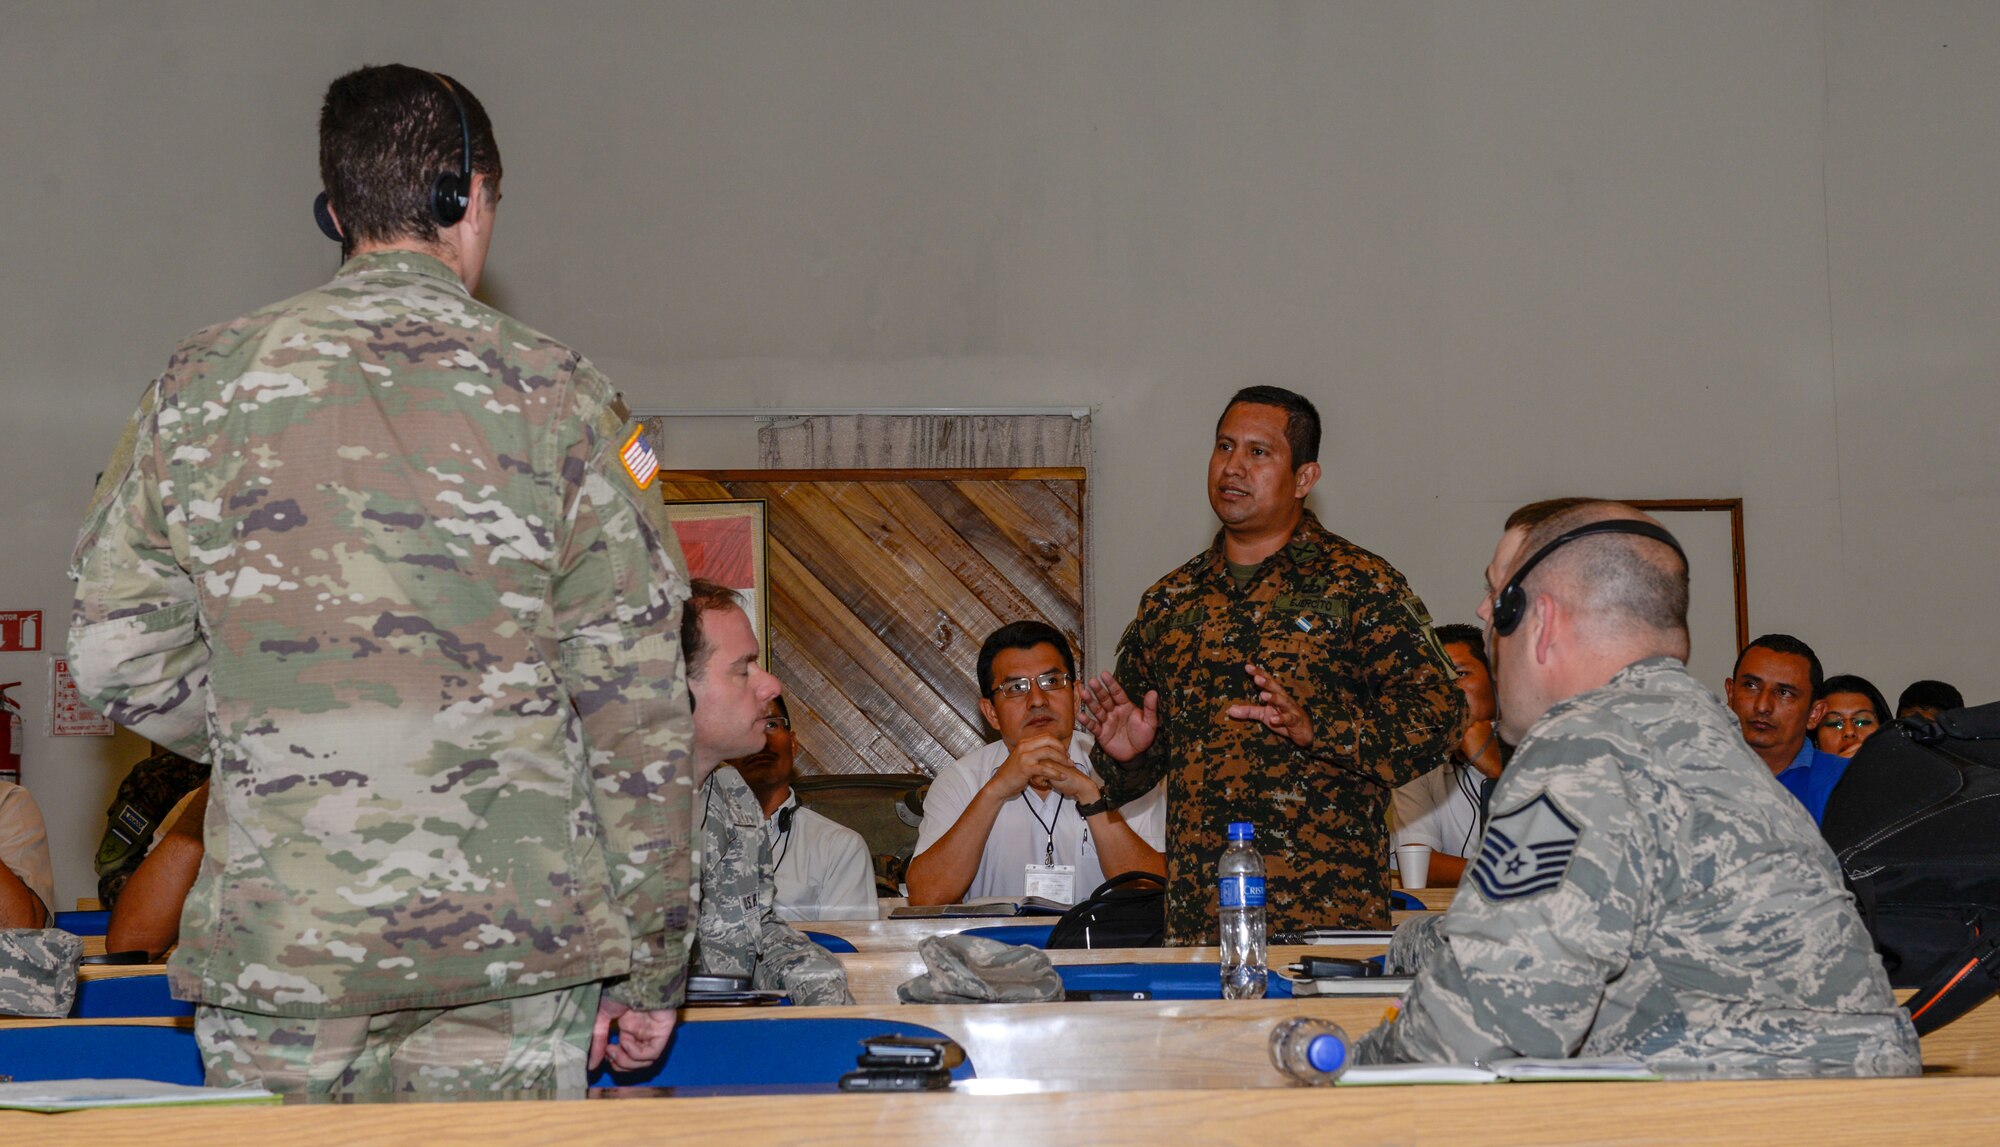 El Salvador Army Capt. Leonel Maye, center standing, artillery commander for La Fuerza Armada de El Salvador, discusses cyber security and cyber defense with the New Hampshire National Guard team visiting San Salvador, El Salvador, September 25, 2018. The discussions are part of the ongoing partnership between New Hampshire and El Salvador under the National Guard State Partnership Program. (N.H. National Guard photo by Tech. Sgt. Aaron Vezeau)